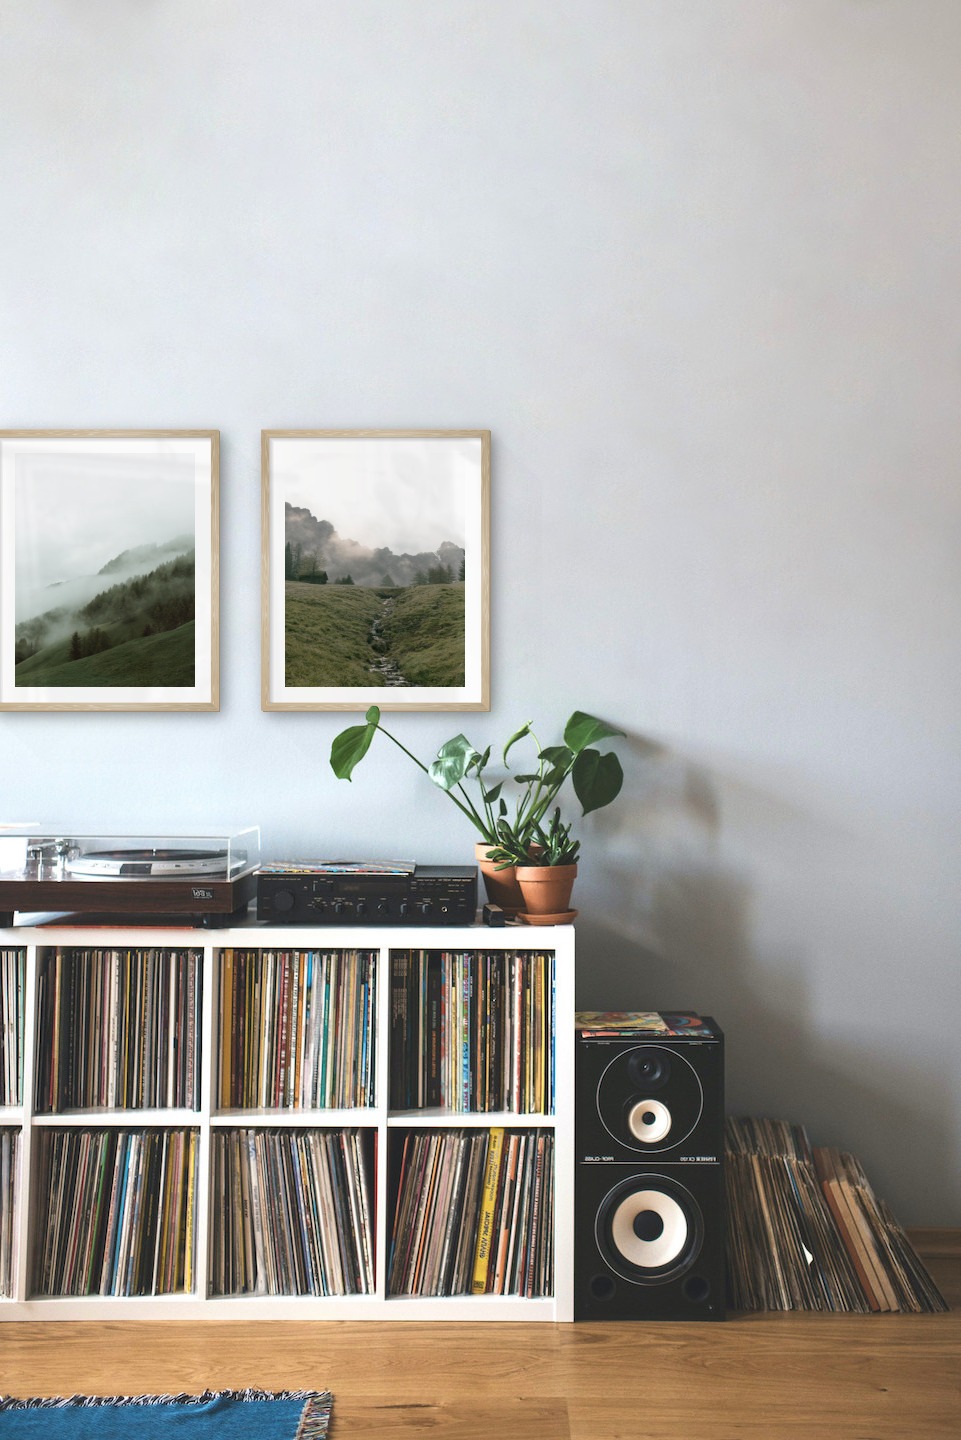 Gallery wall with picture frames in wood in sizes 40x50 with prints "Foggy slope" and "Green valley in front of mountains"